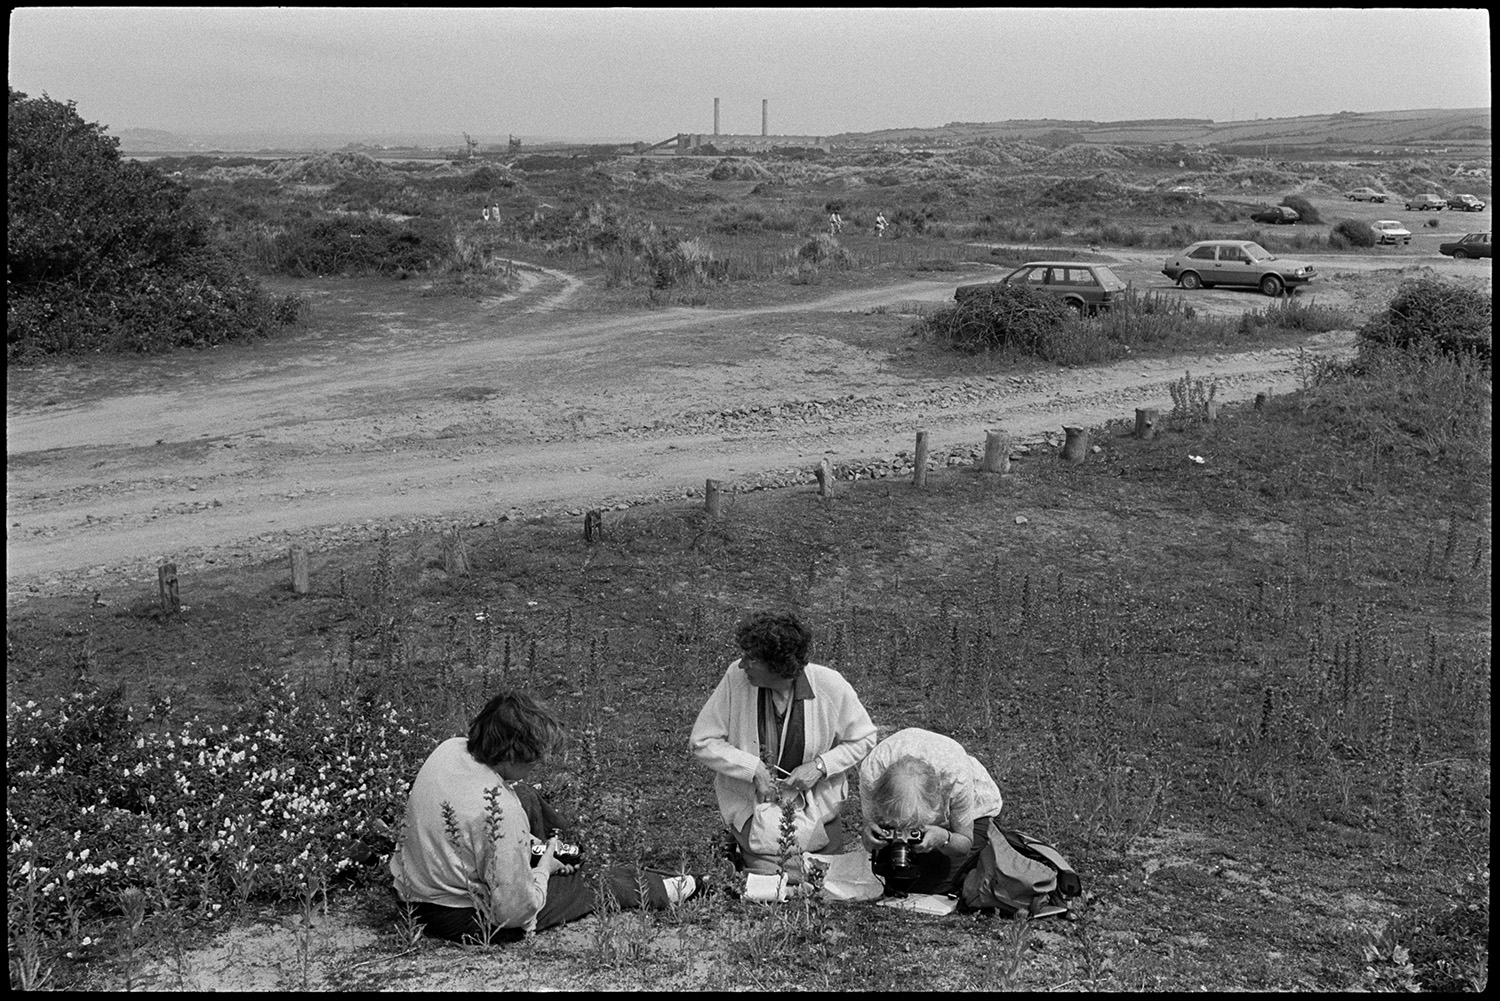 Women studying flowers in nature reserve. 
[Three women studying flowers on the sand dunes in the nature reserve at Braunton Burrows. Margaret Tulloh is photographing a flower. Parked cars can be seen in the background and Yelland Power Station is visible on the horizon.]